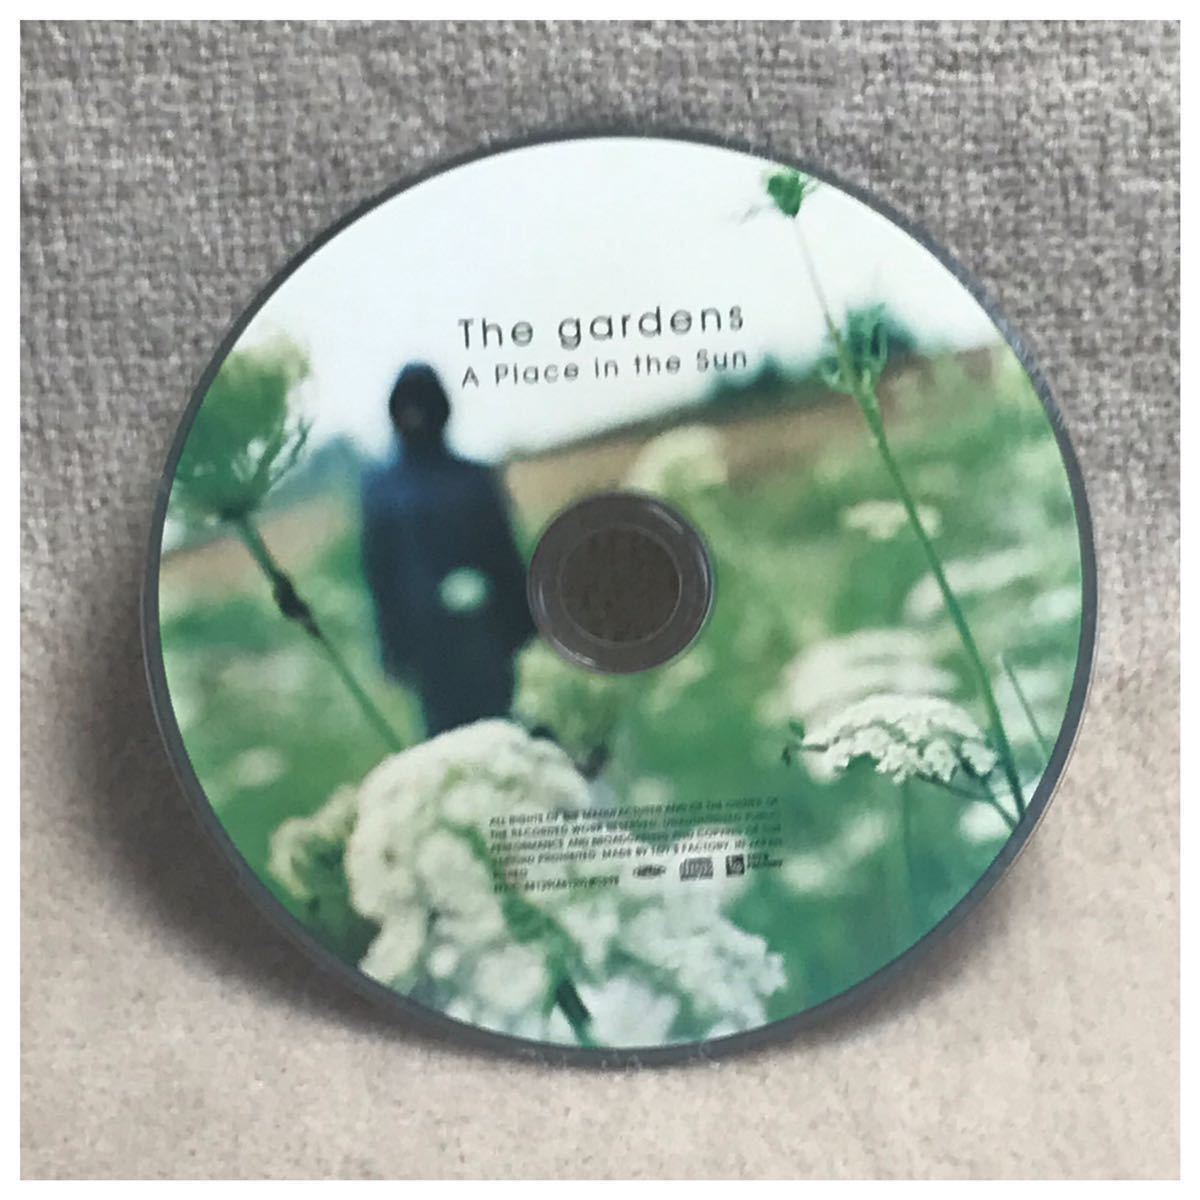 A Place in the Sun / The gardens《スリーブケース》